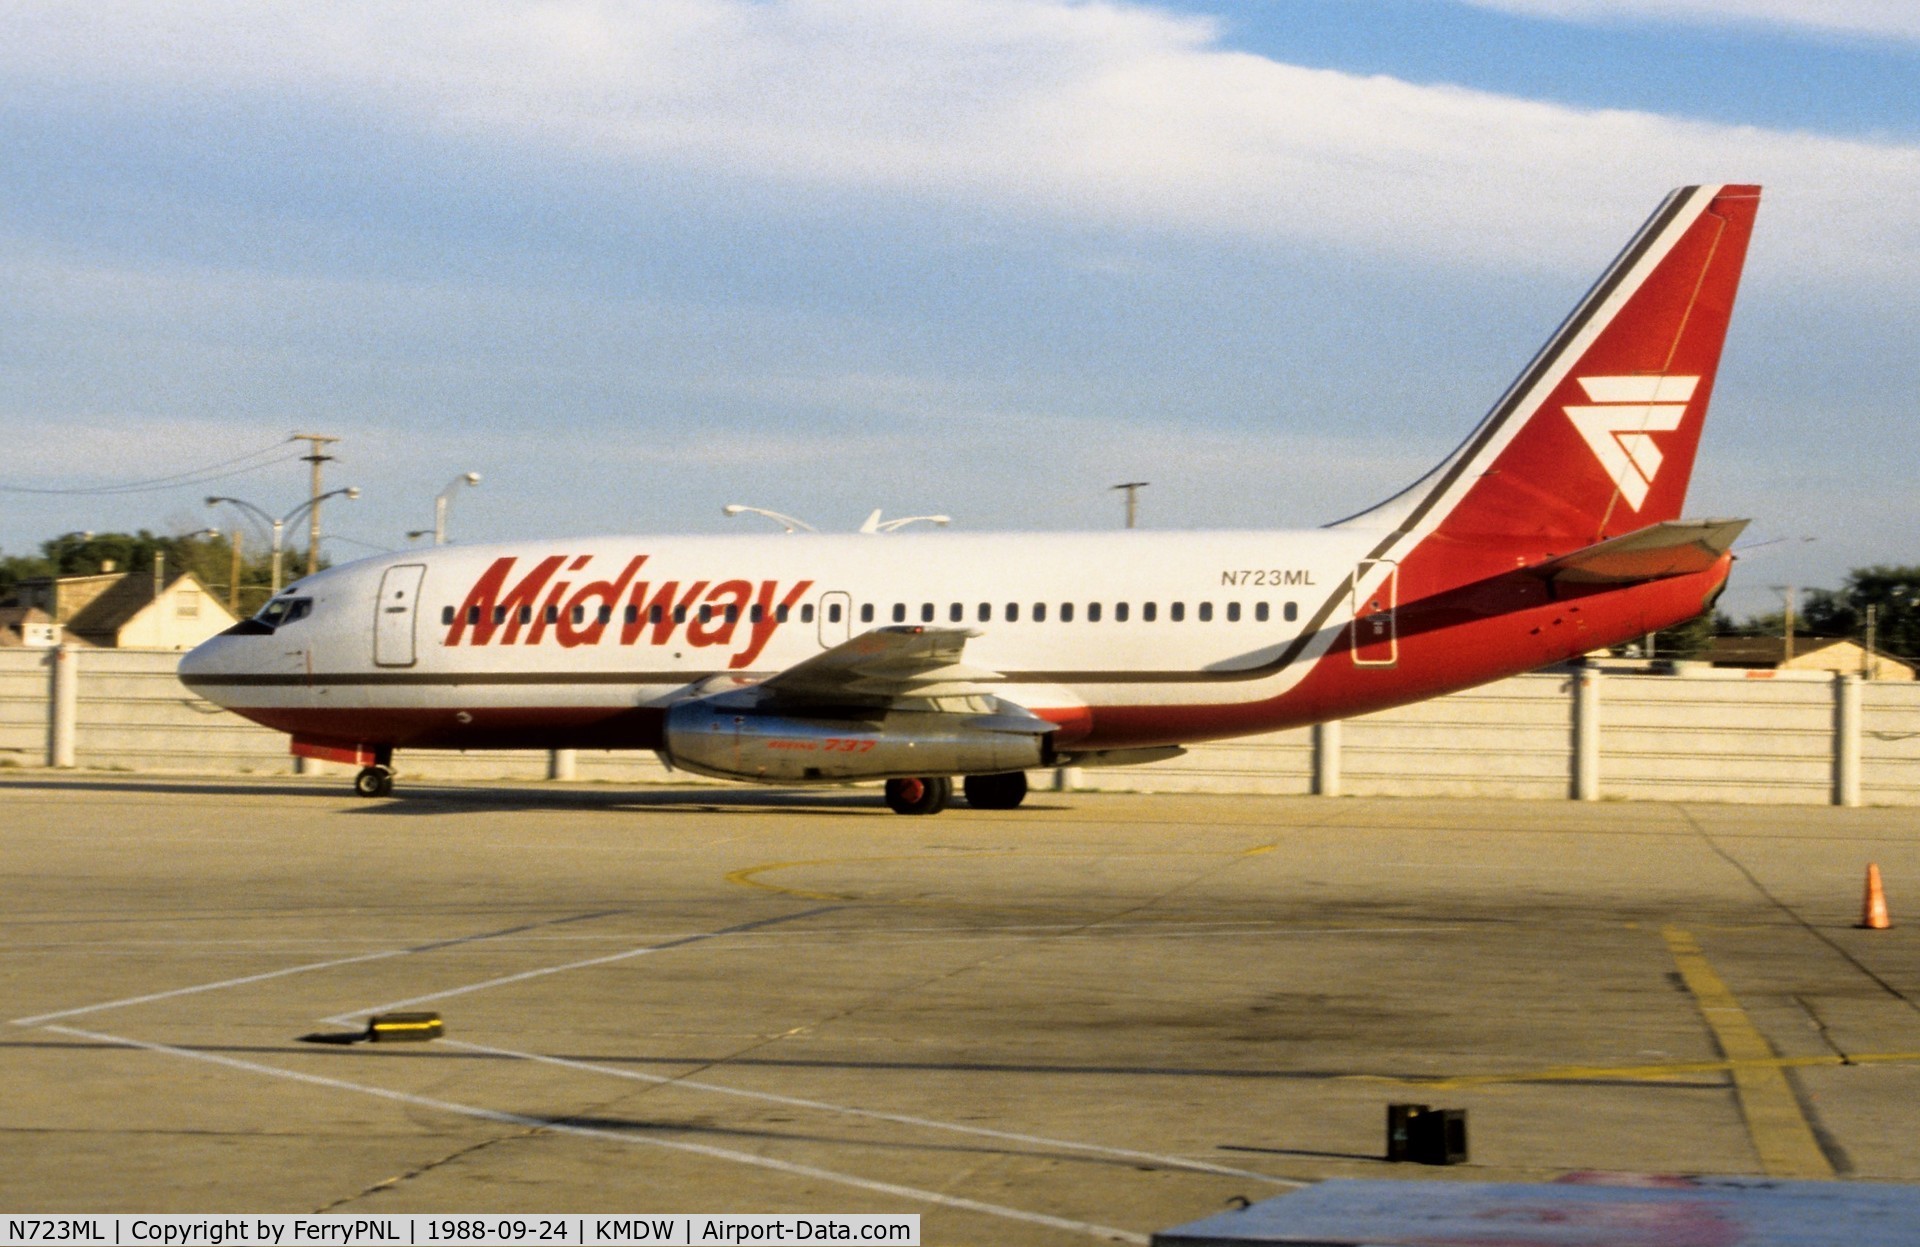 N723ML, 1987 Boeing 737-25A C/N 23789, Midway B732 at its home-base